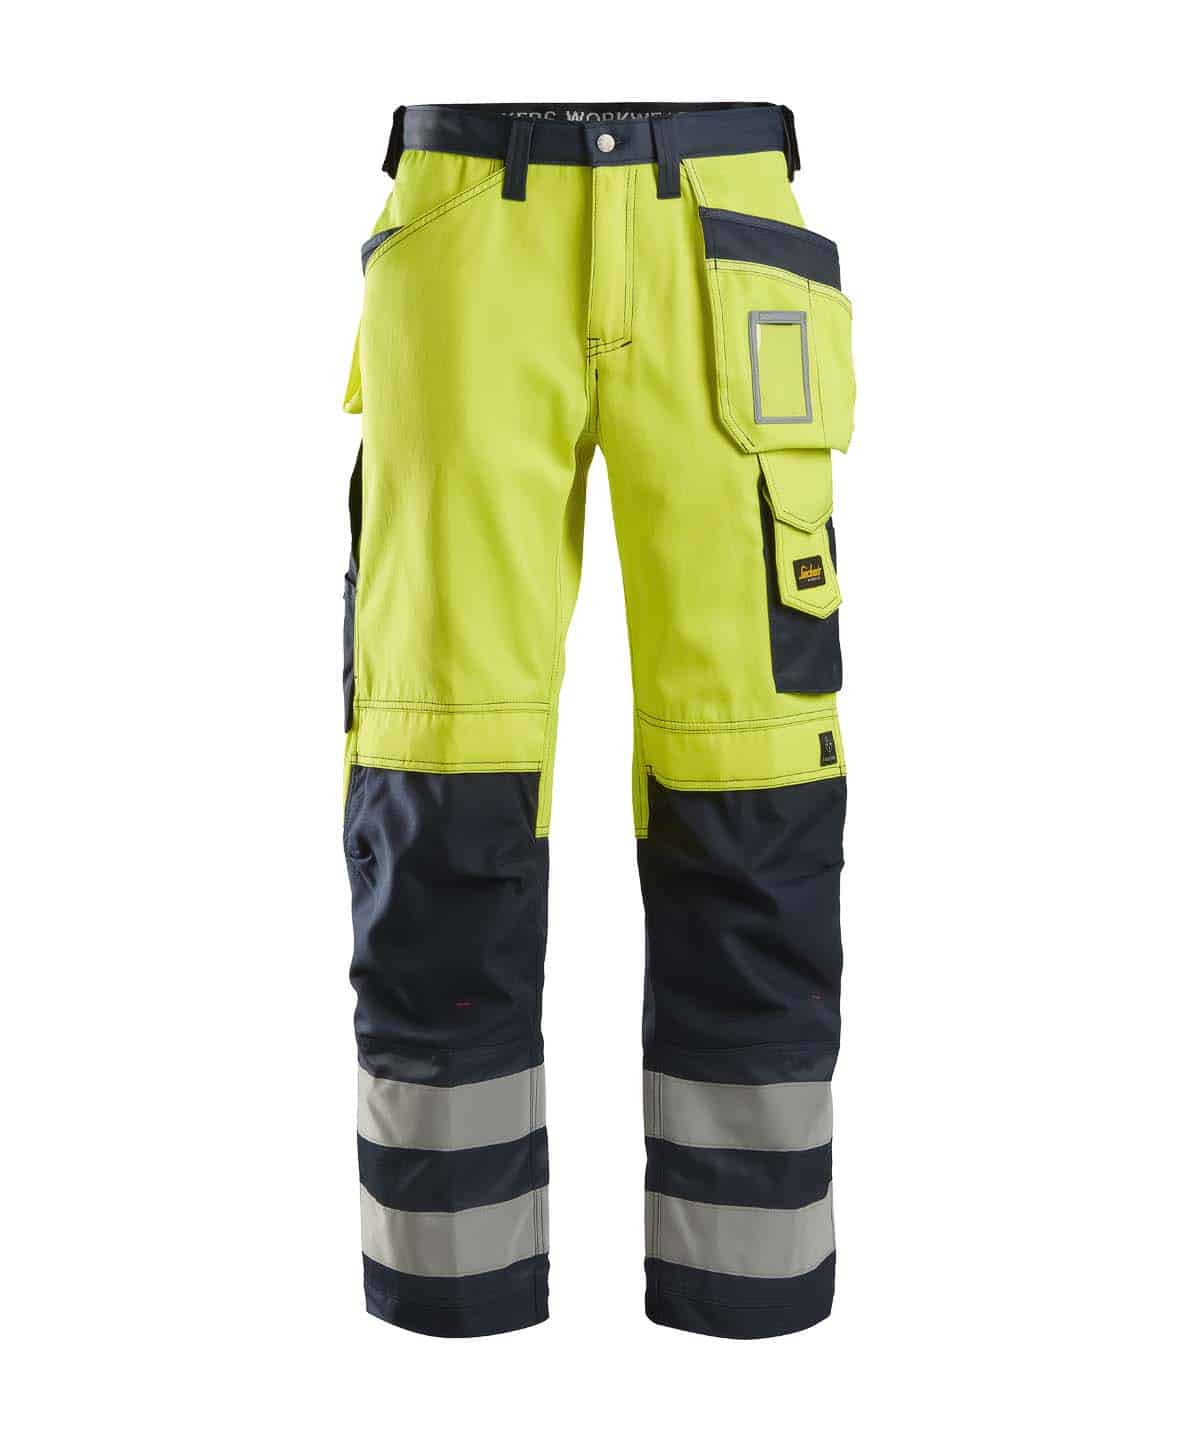 Snickers 3233 High Visibility Work Trousers Snickers Direct Orange  eBay